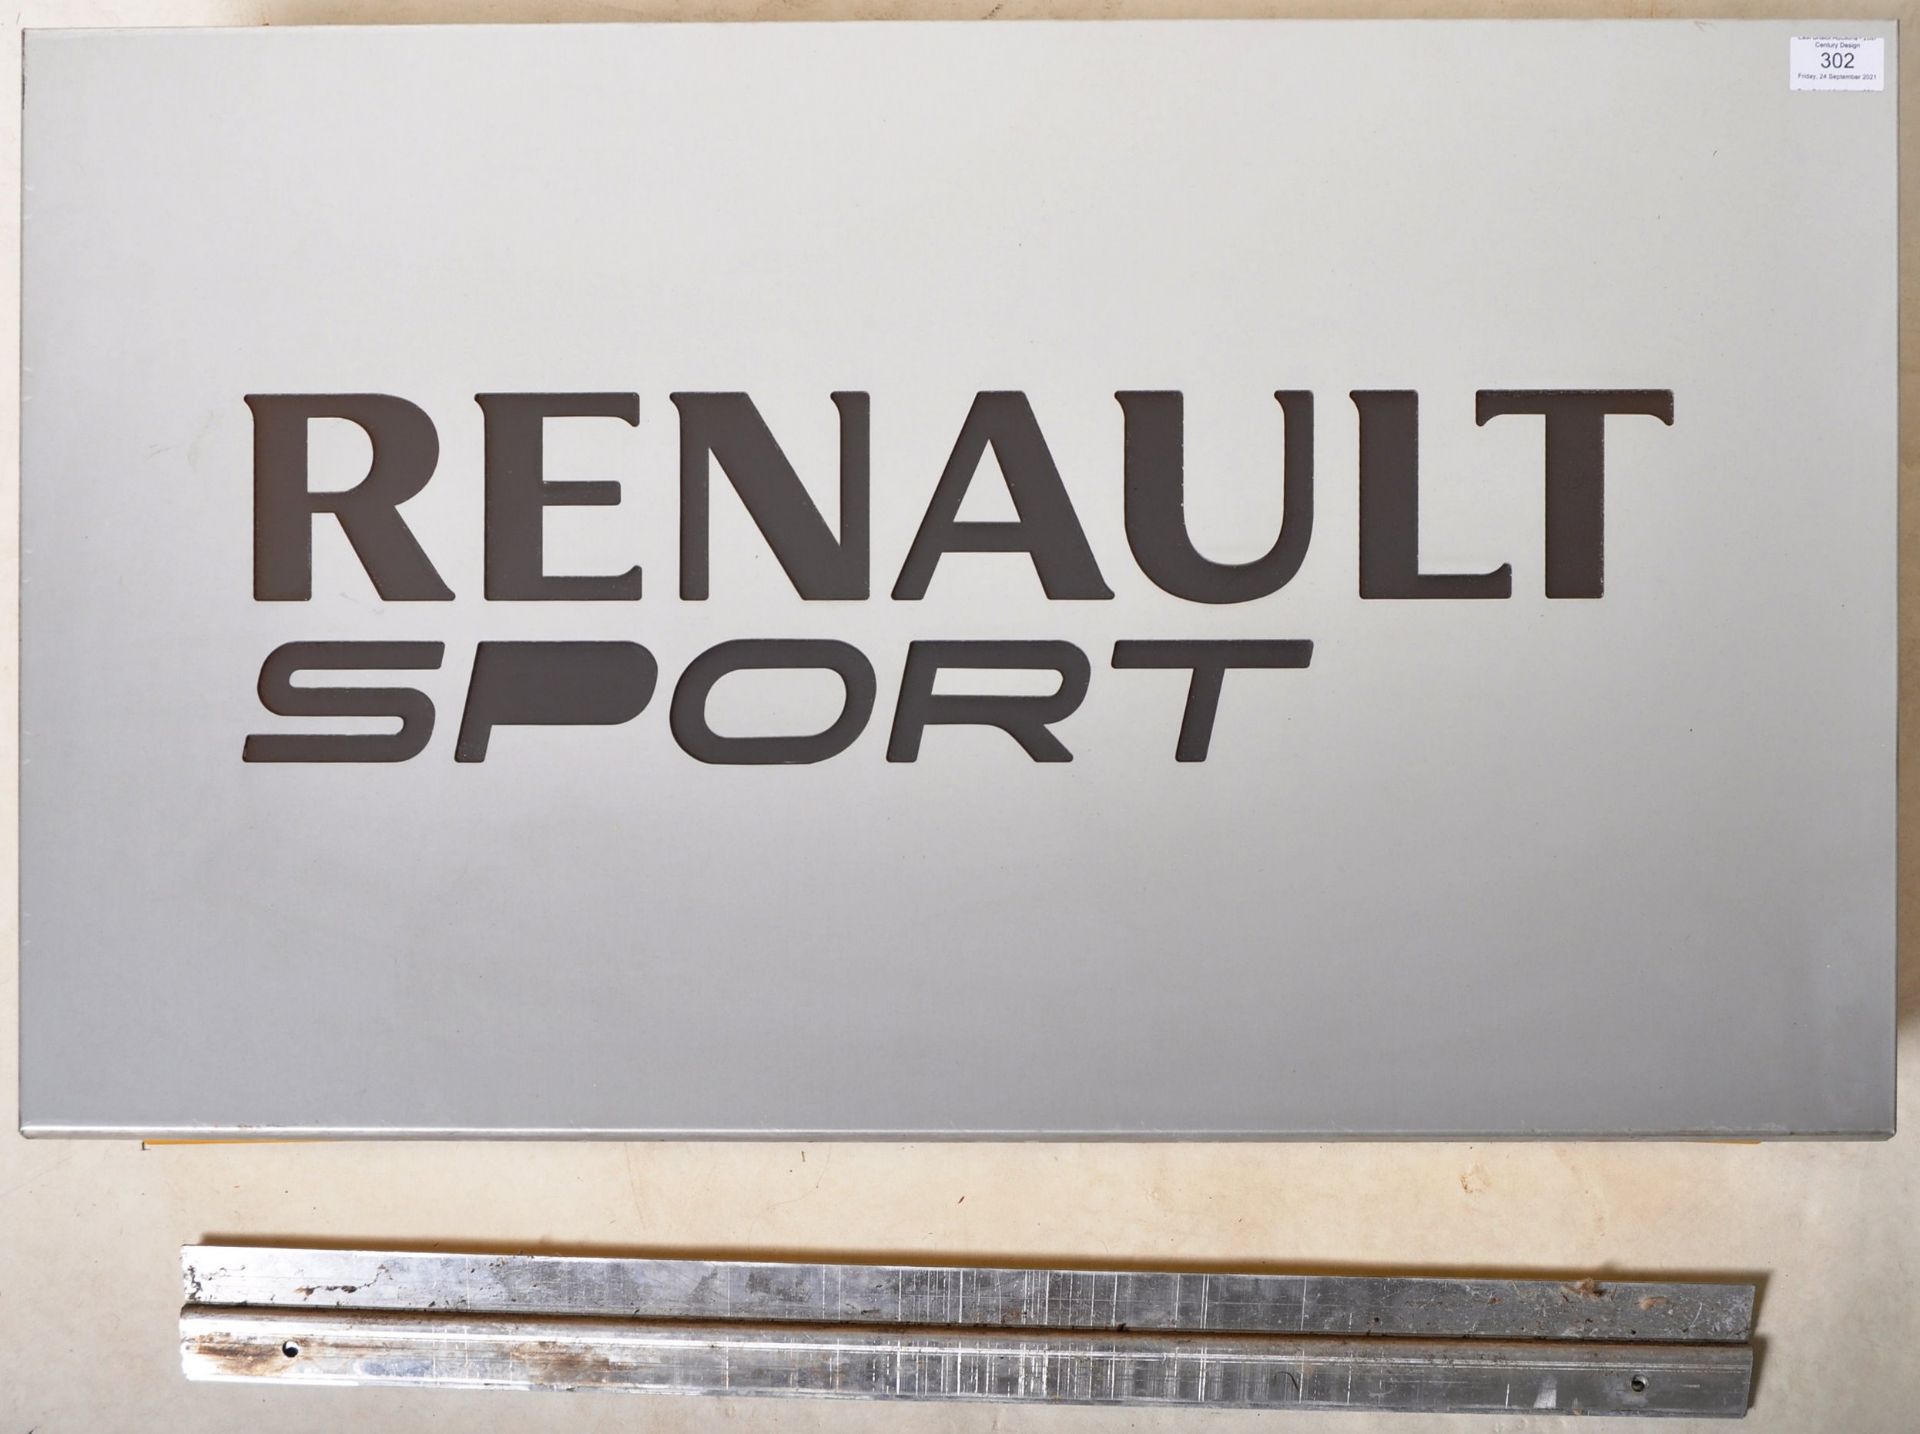 RENAULT SPORT - POINT OF SALE FORECOURT ADVERTISING SIGN